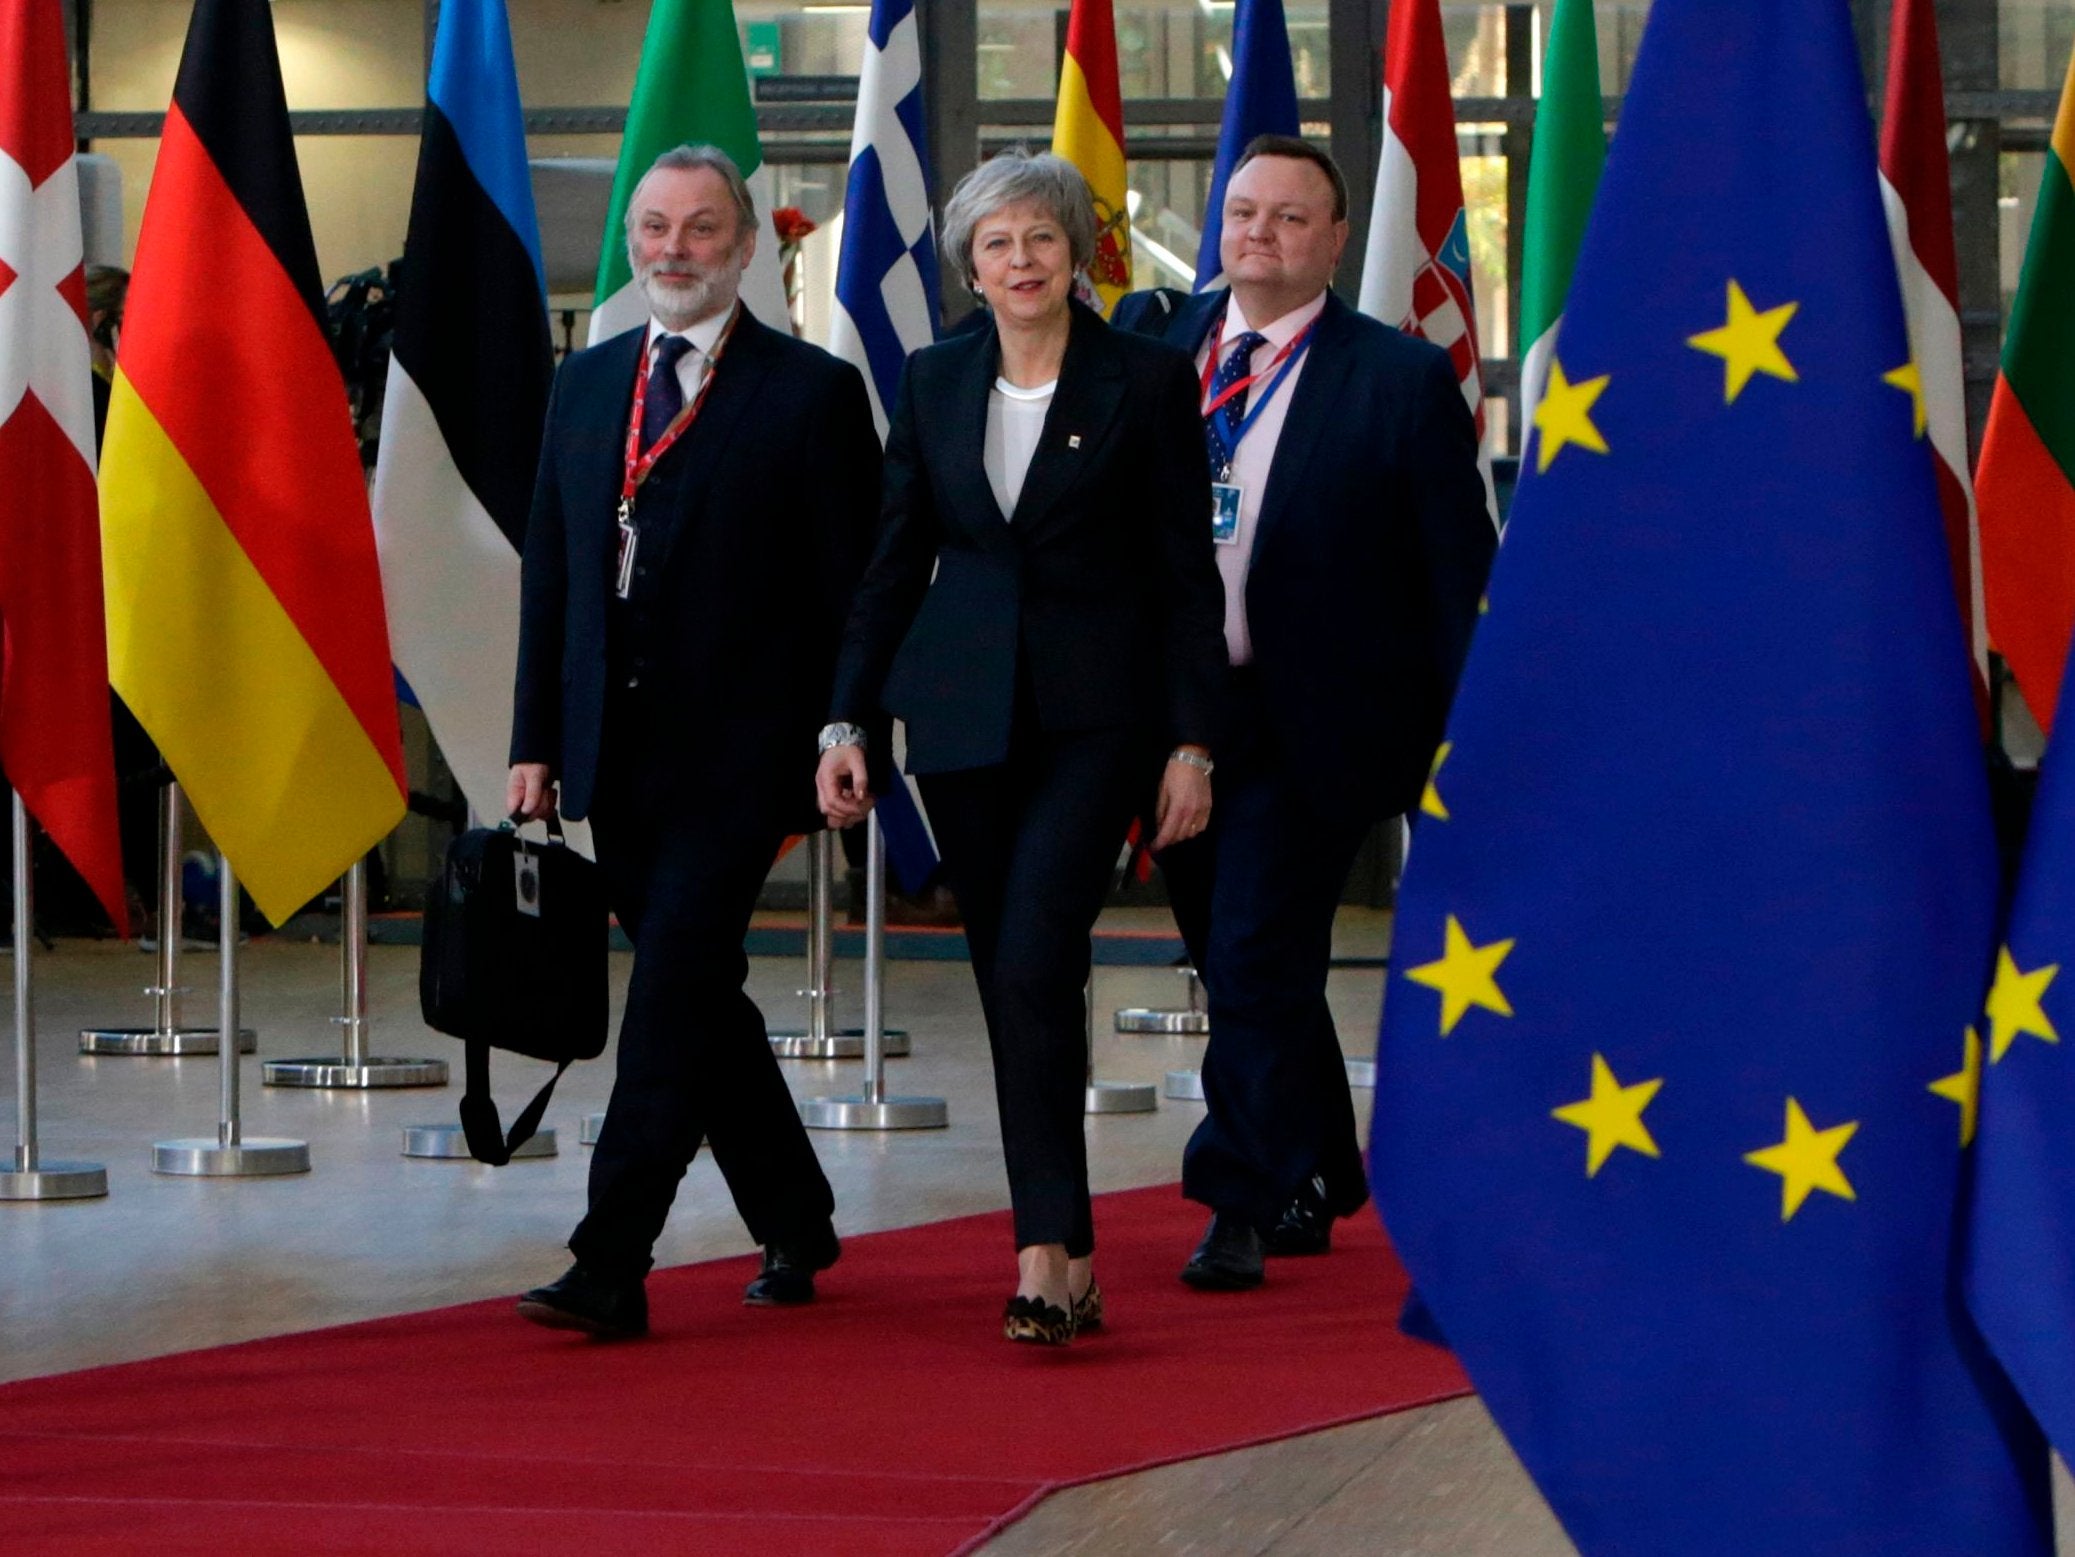 The 27 European leaders gathered in Brussels on Wednesday for a crucial European Union summit, with Theresa May seeking a compromise to save the Brexit deal